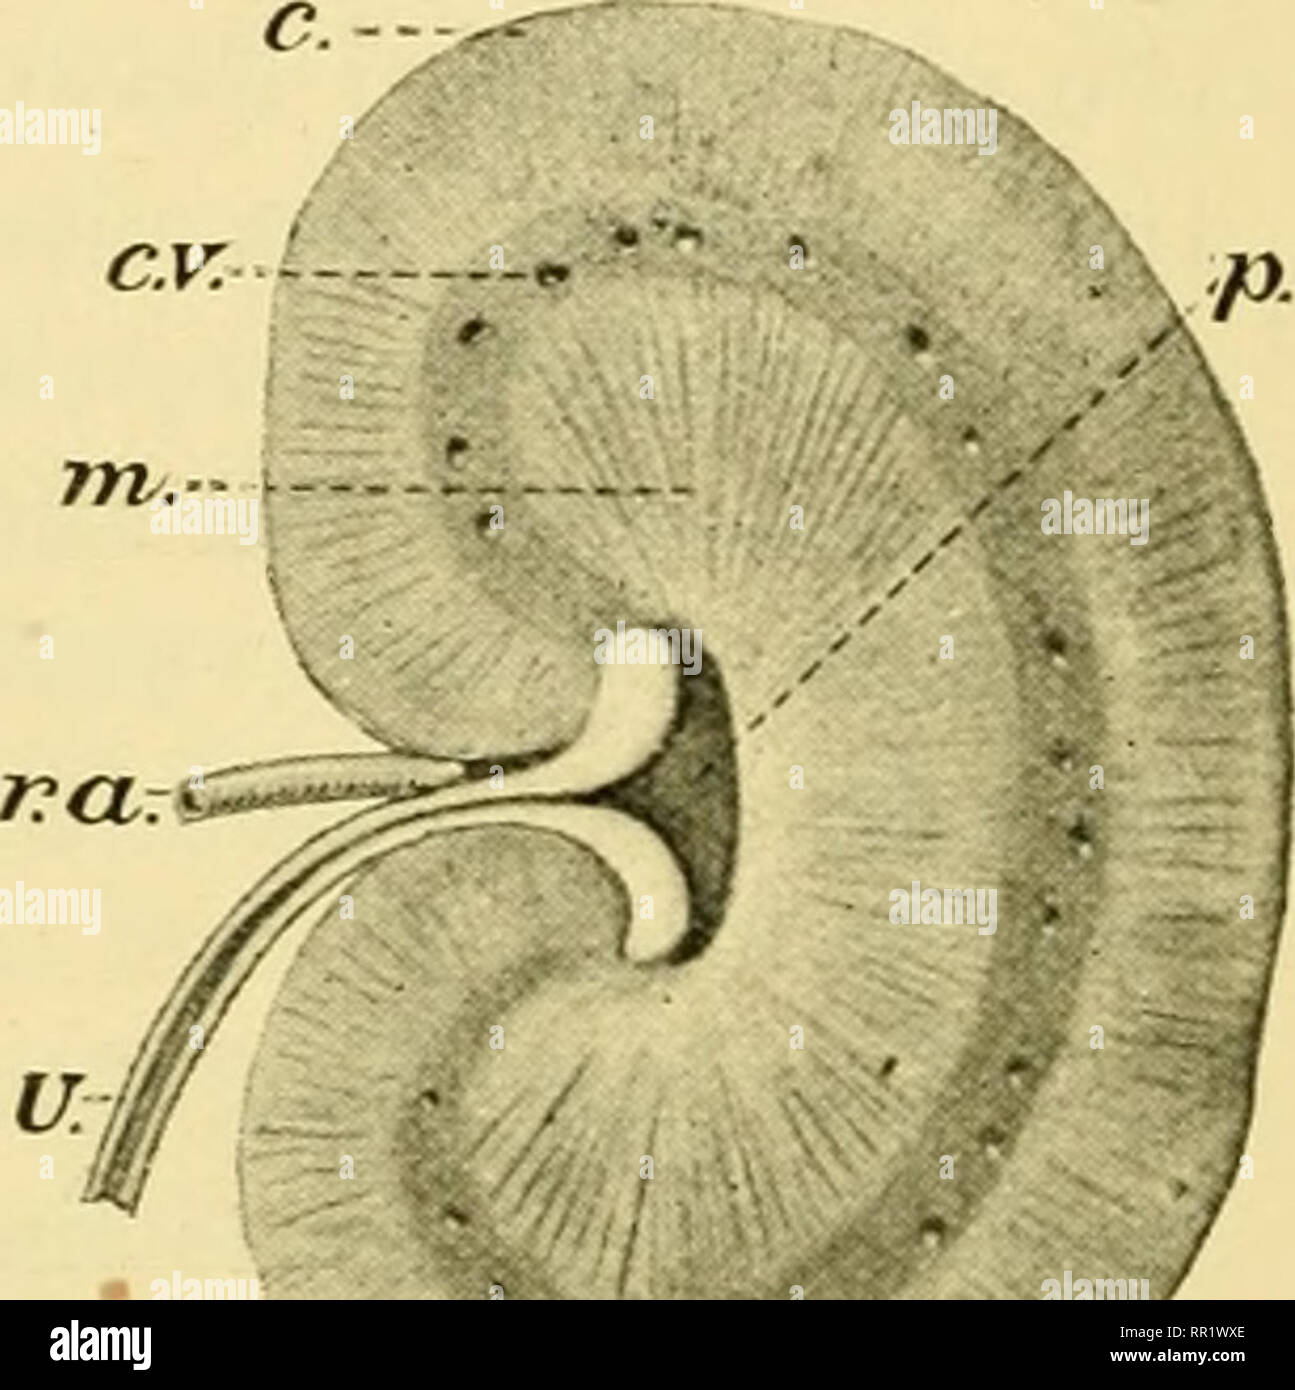 . African invertebrates : a journal of biodiversity research. Invertebrates -- Africa; Biological diversity -- Africa; Biological diversity. 1 and 2. Junction of caecum, large intestine and small intestine. 3. Horizontal section of kidney. Natnral size. c. CseciTni. c. Cortex, c.v. Capillary vessel. L.i. Large intestine, m. Medul- lary portion, p. Pelvis of kidney, r.a. Renal artery, s.l. Small intestine, u. Ureter. gnll-bladder, then a right lateral was present, and also a caudate fitting over the anterior surface of the kidney. A bile-duct passed from the gall-bladder, and opened into the to Stock Photo